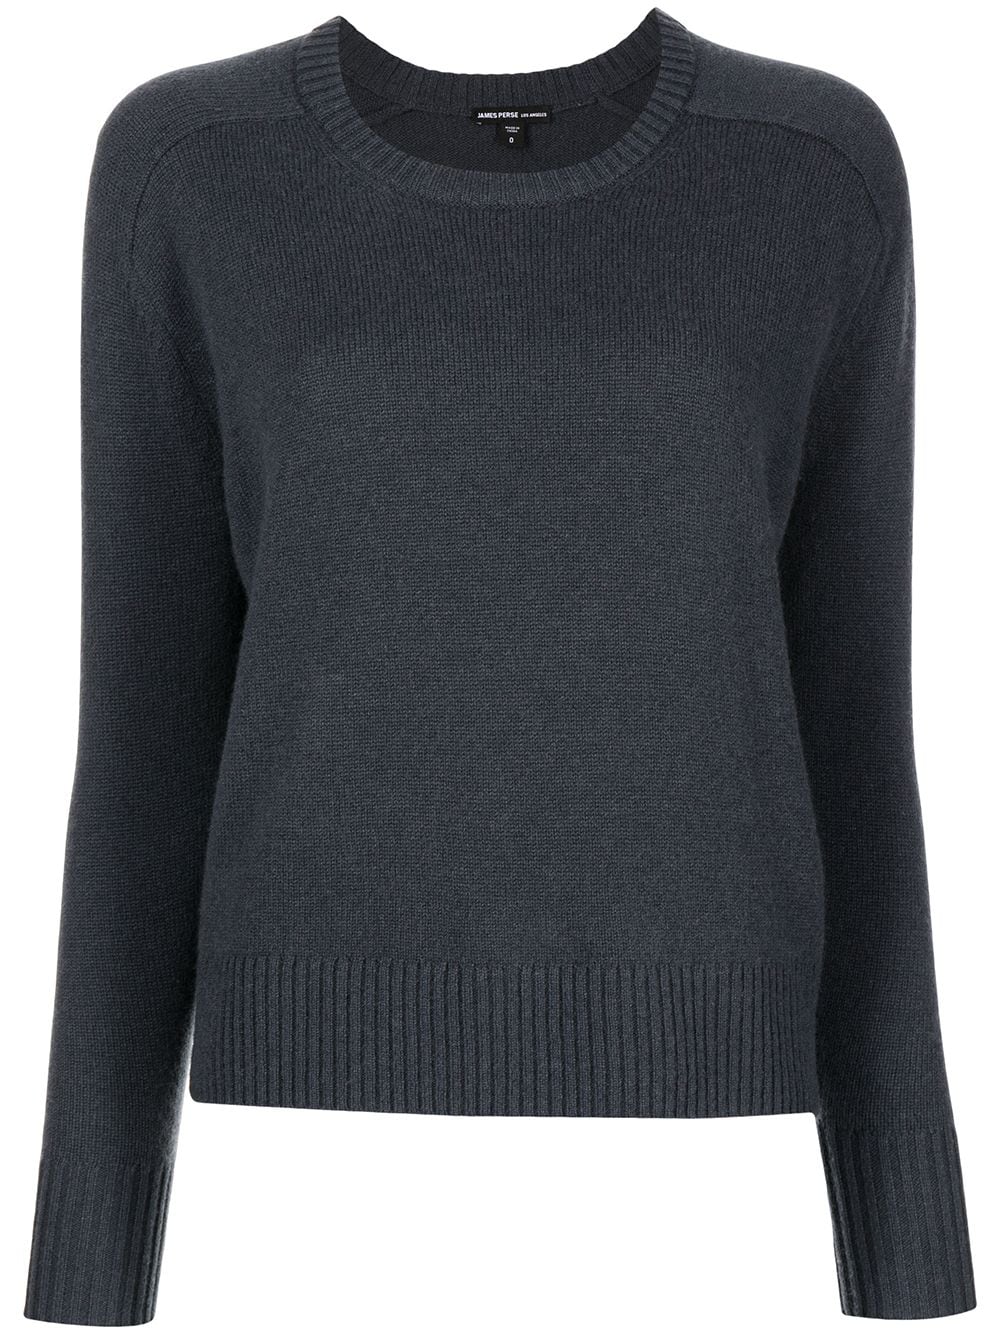 James Perse Crewneck Knitted Sweater - Farfetch